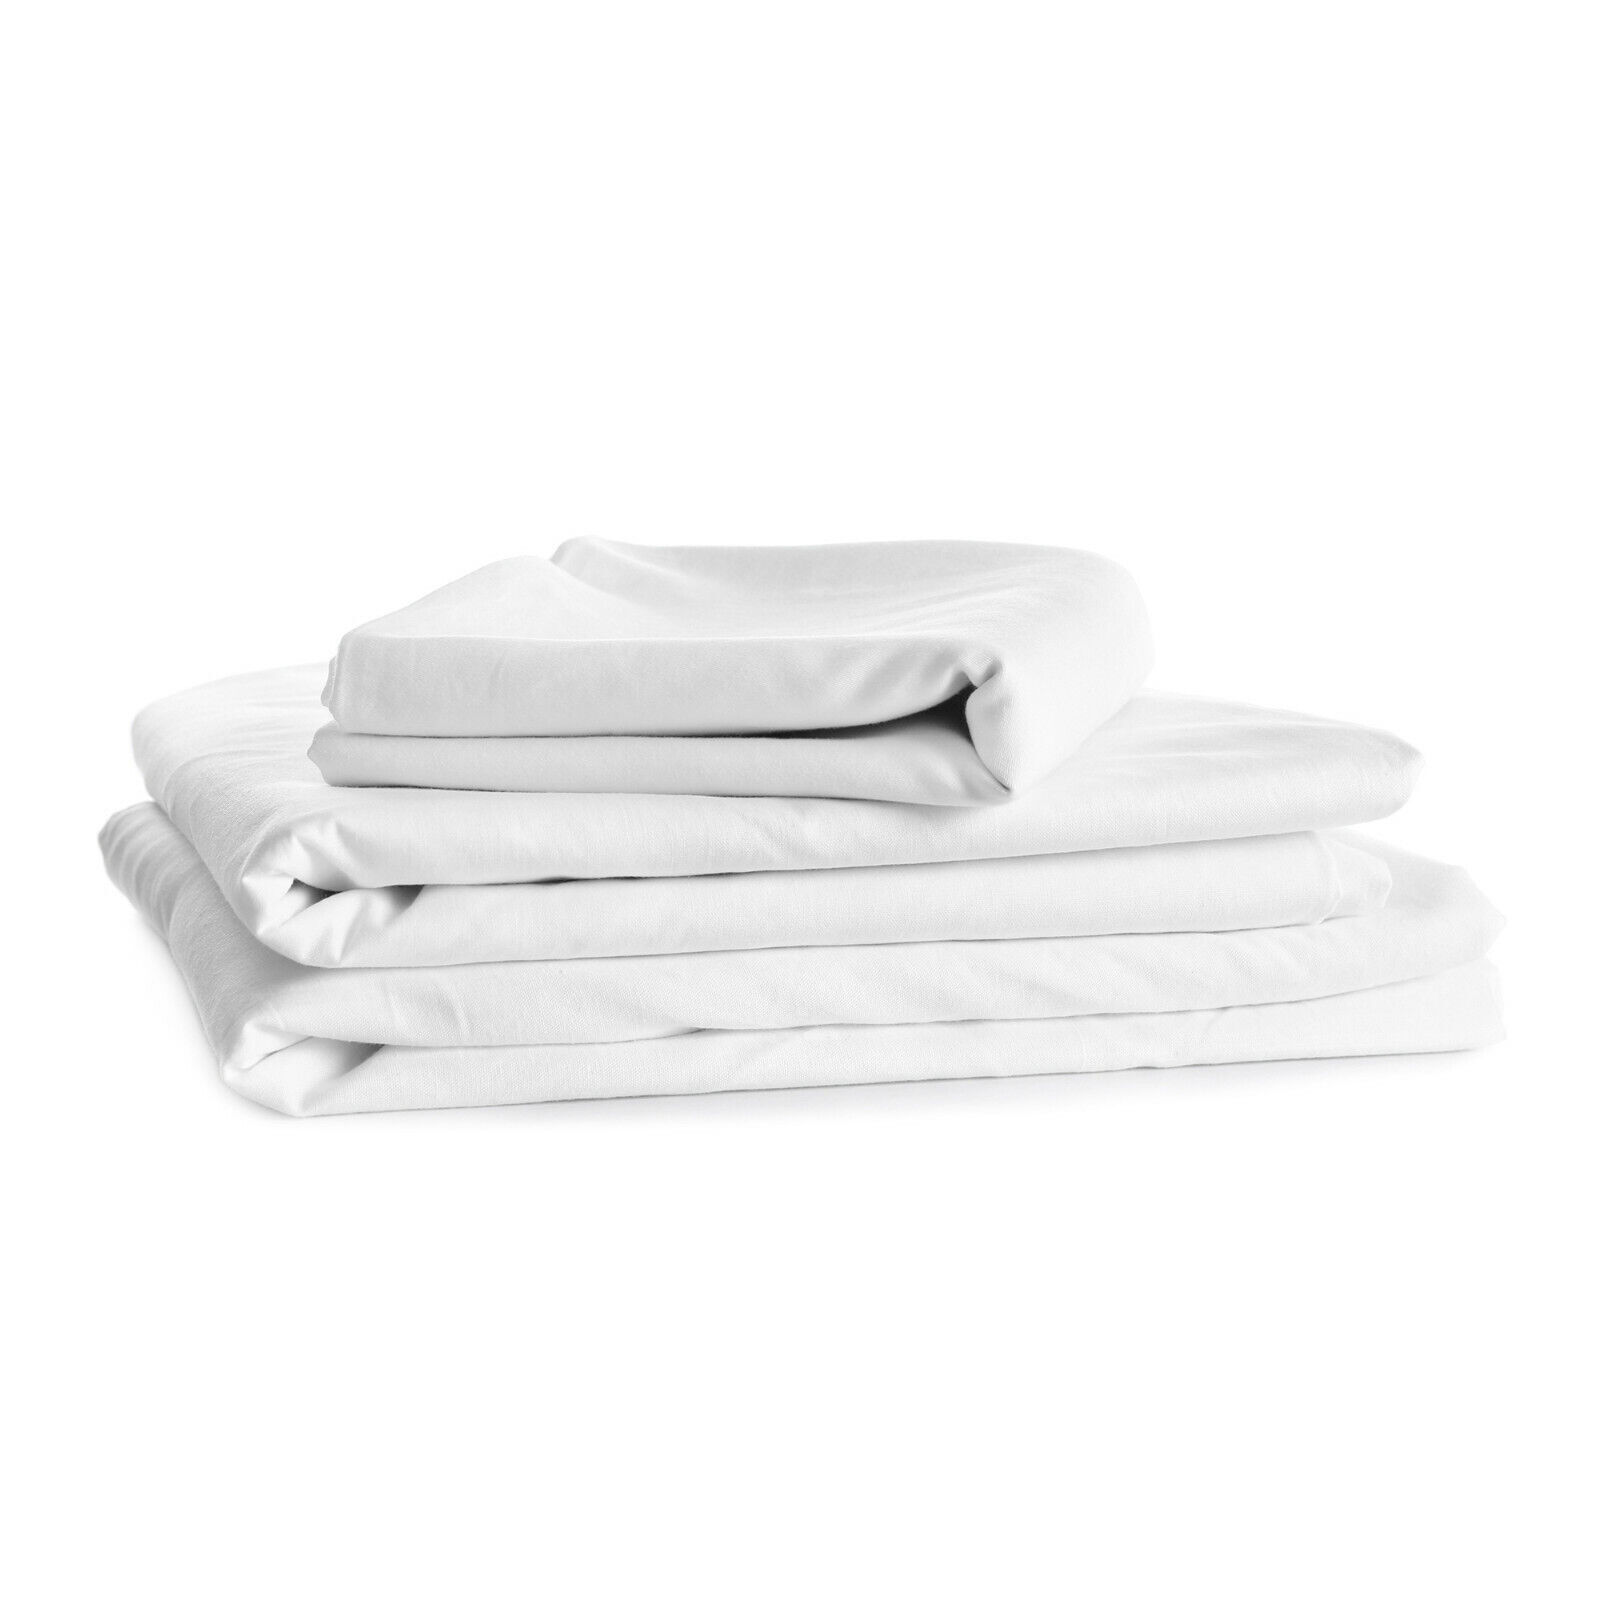 King Size Bed Sheets Egyptian Cotton Feel 1800 Count Set 4 Piece Bed Sheet Set